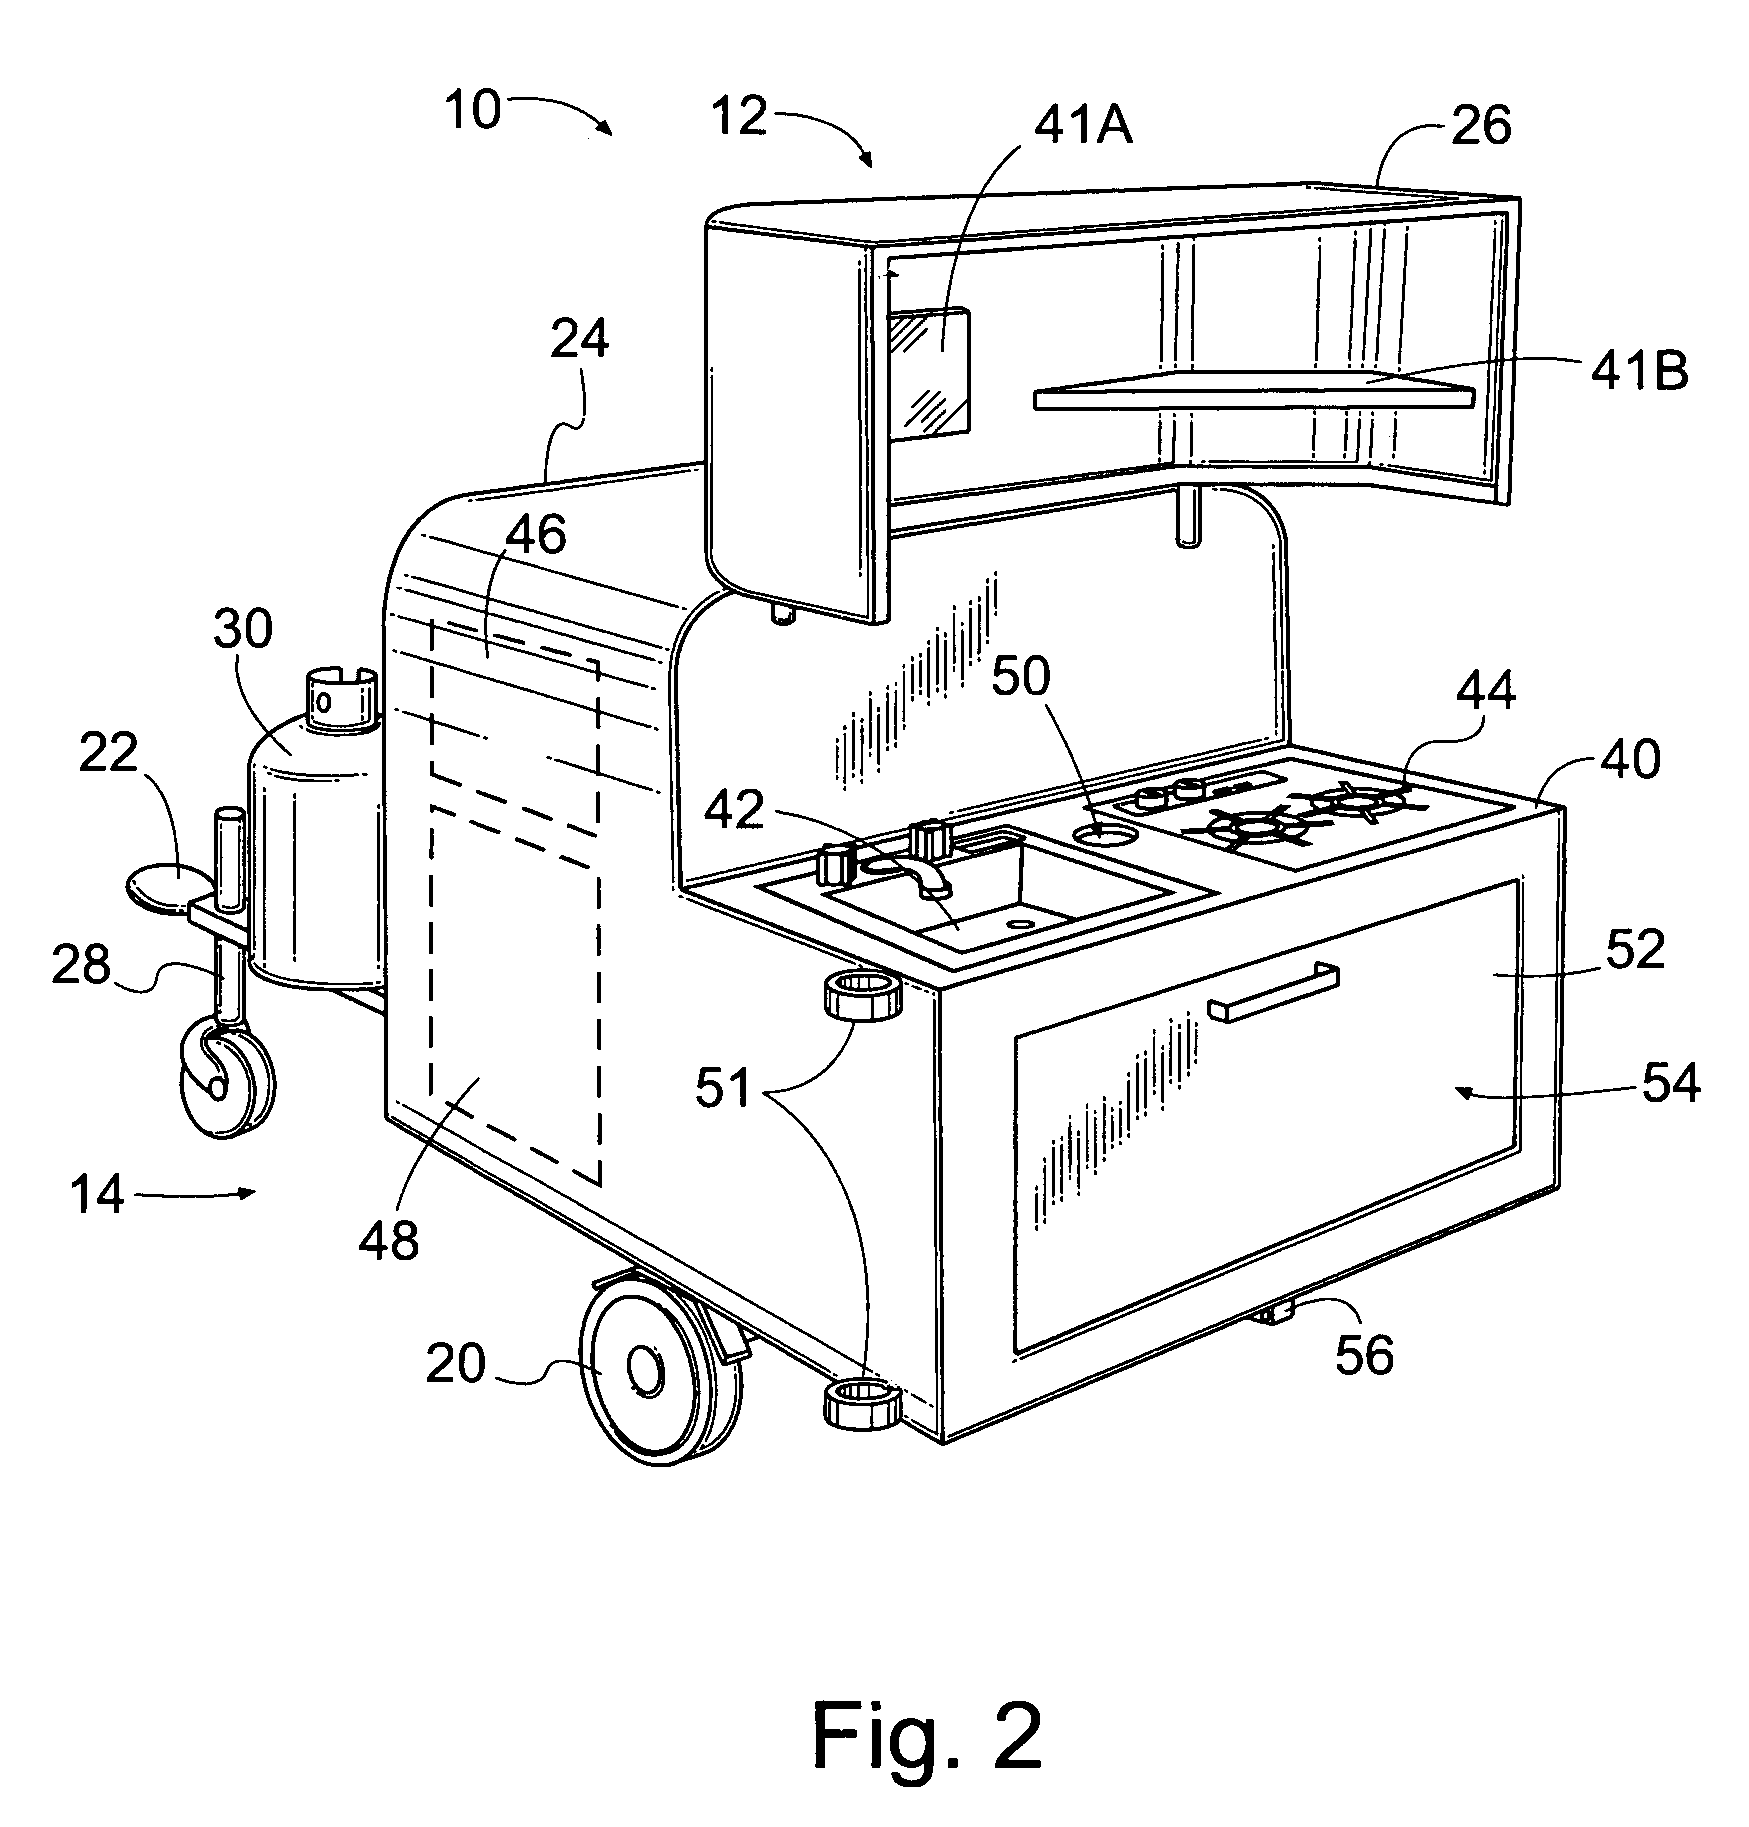 Mobile camping facility and method for constructing same